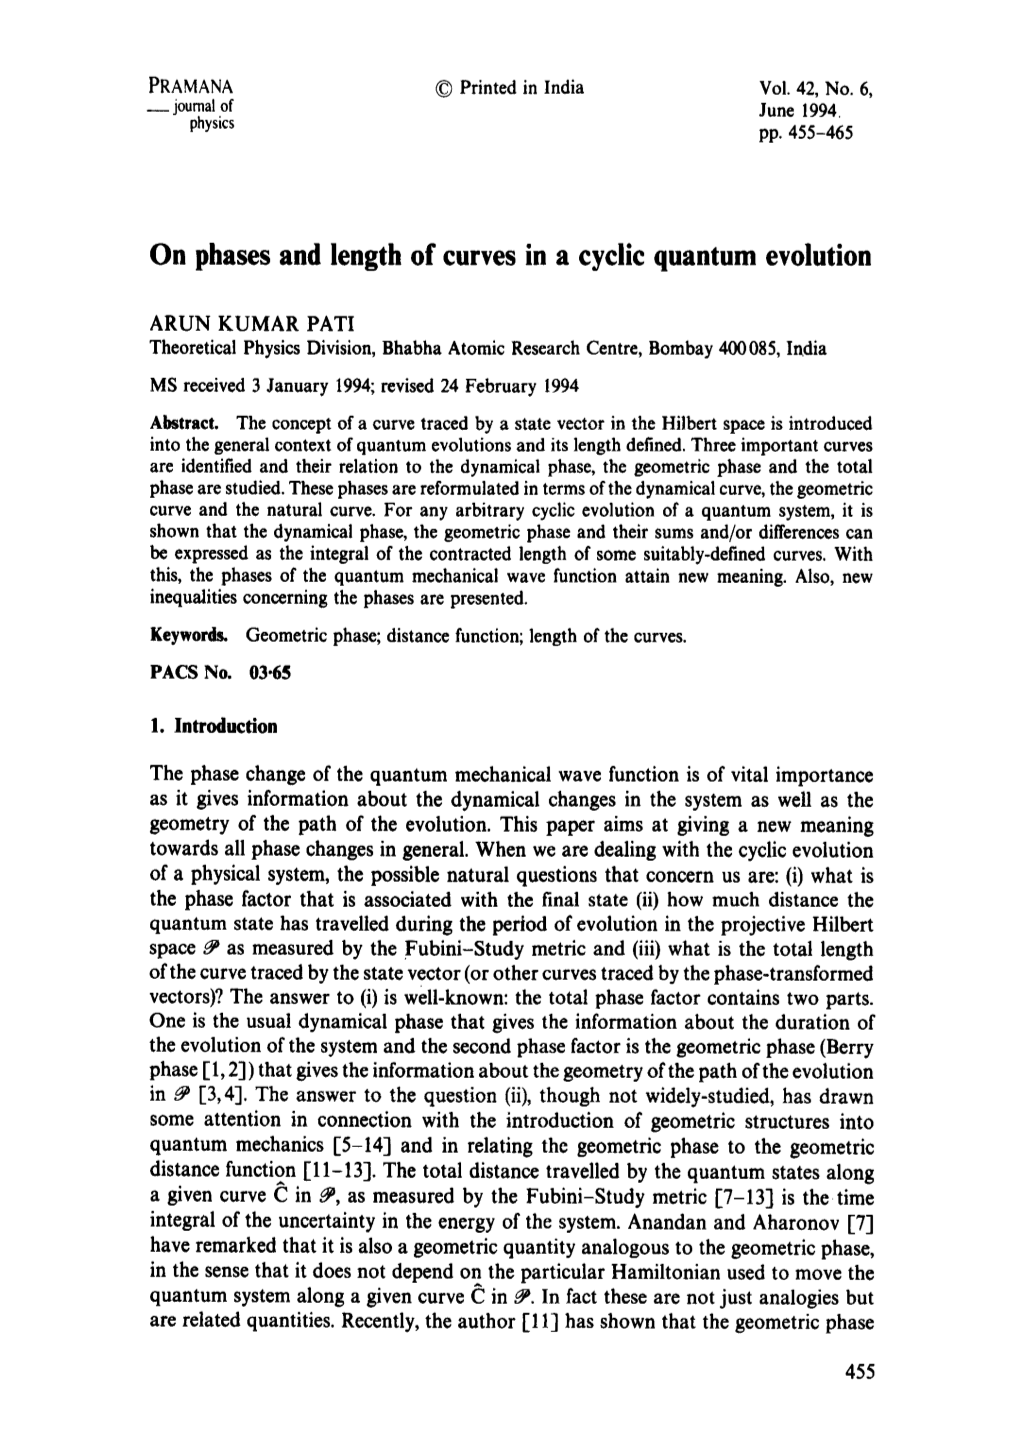 On Phases and Length of Curves in a Cyclic Quantum Evolution